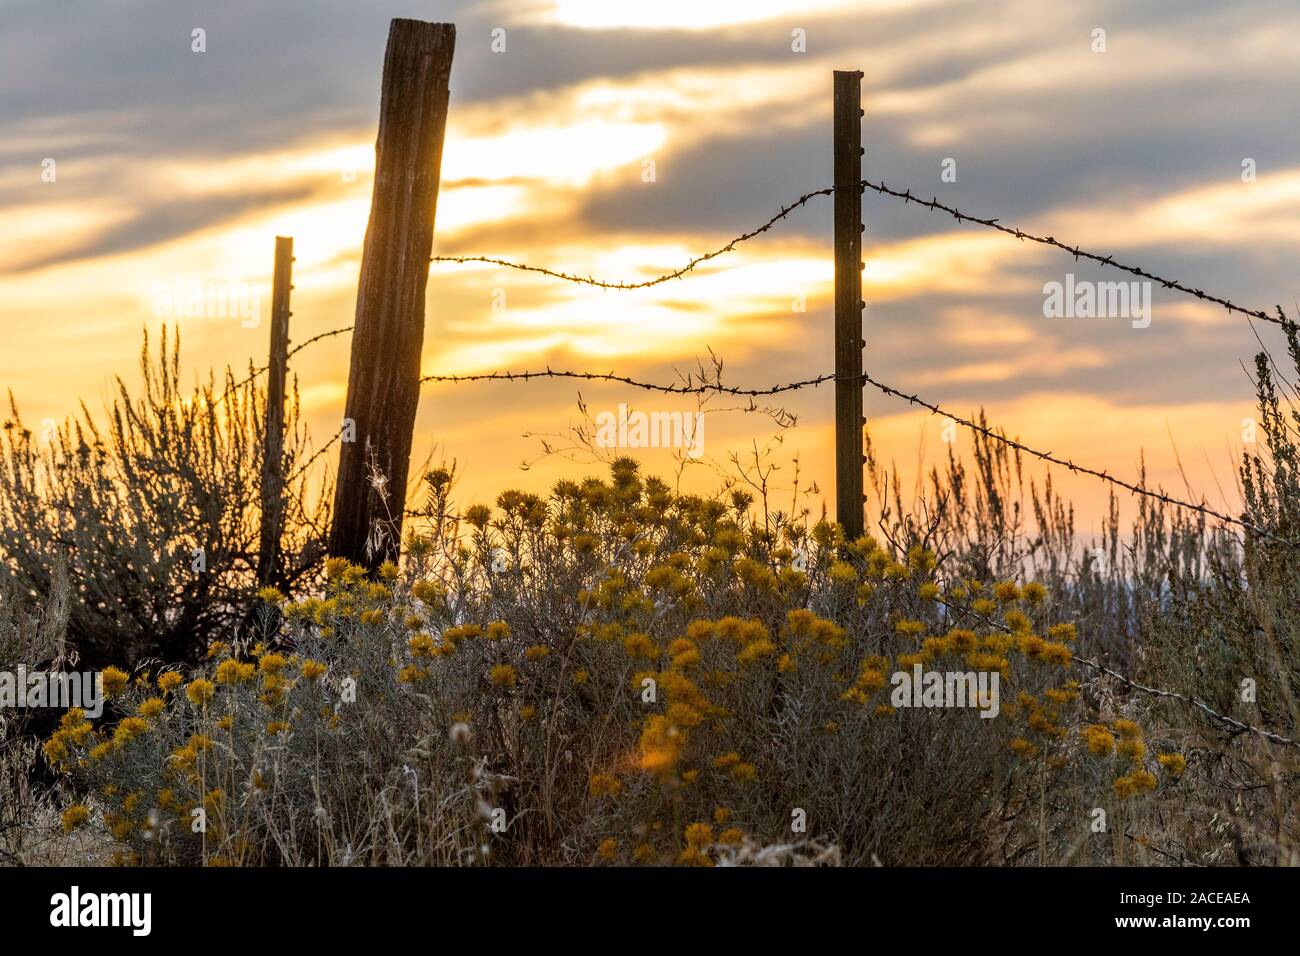 Sagebrush and barbed wire fence at Boise Foothills in Boise, Idaho, USA Stock Photo